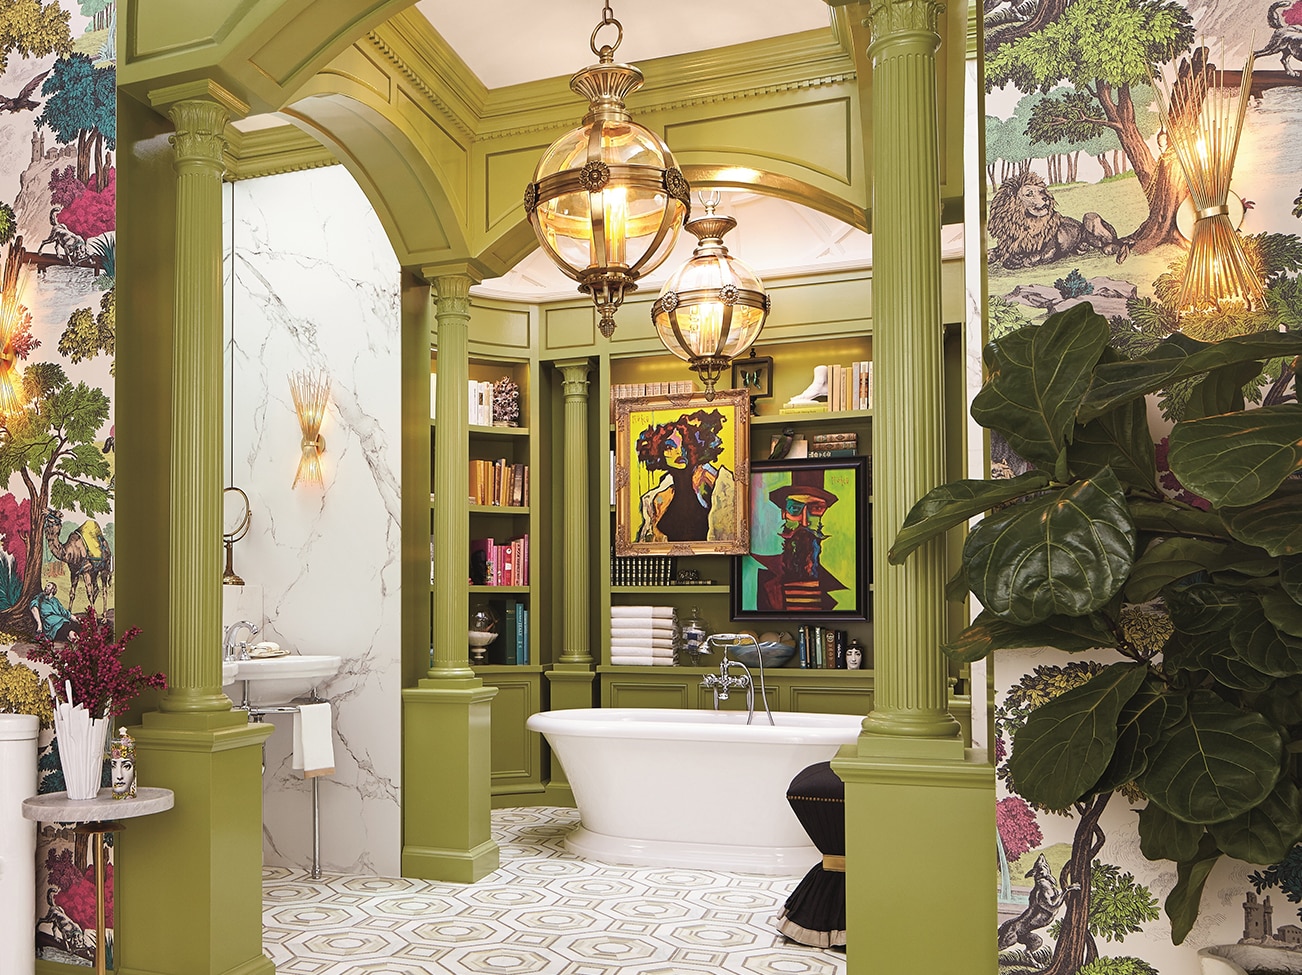 Master bath with painted green columns and alcoves, oval white tub with art and shelves, botanical wallpaper, and geometric floor.